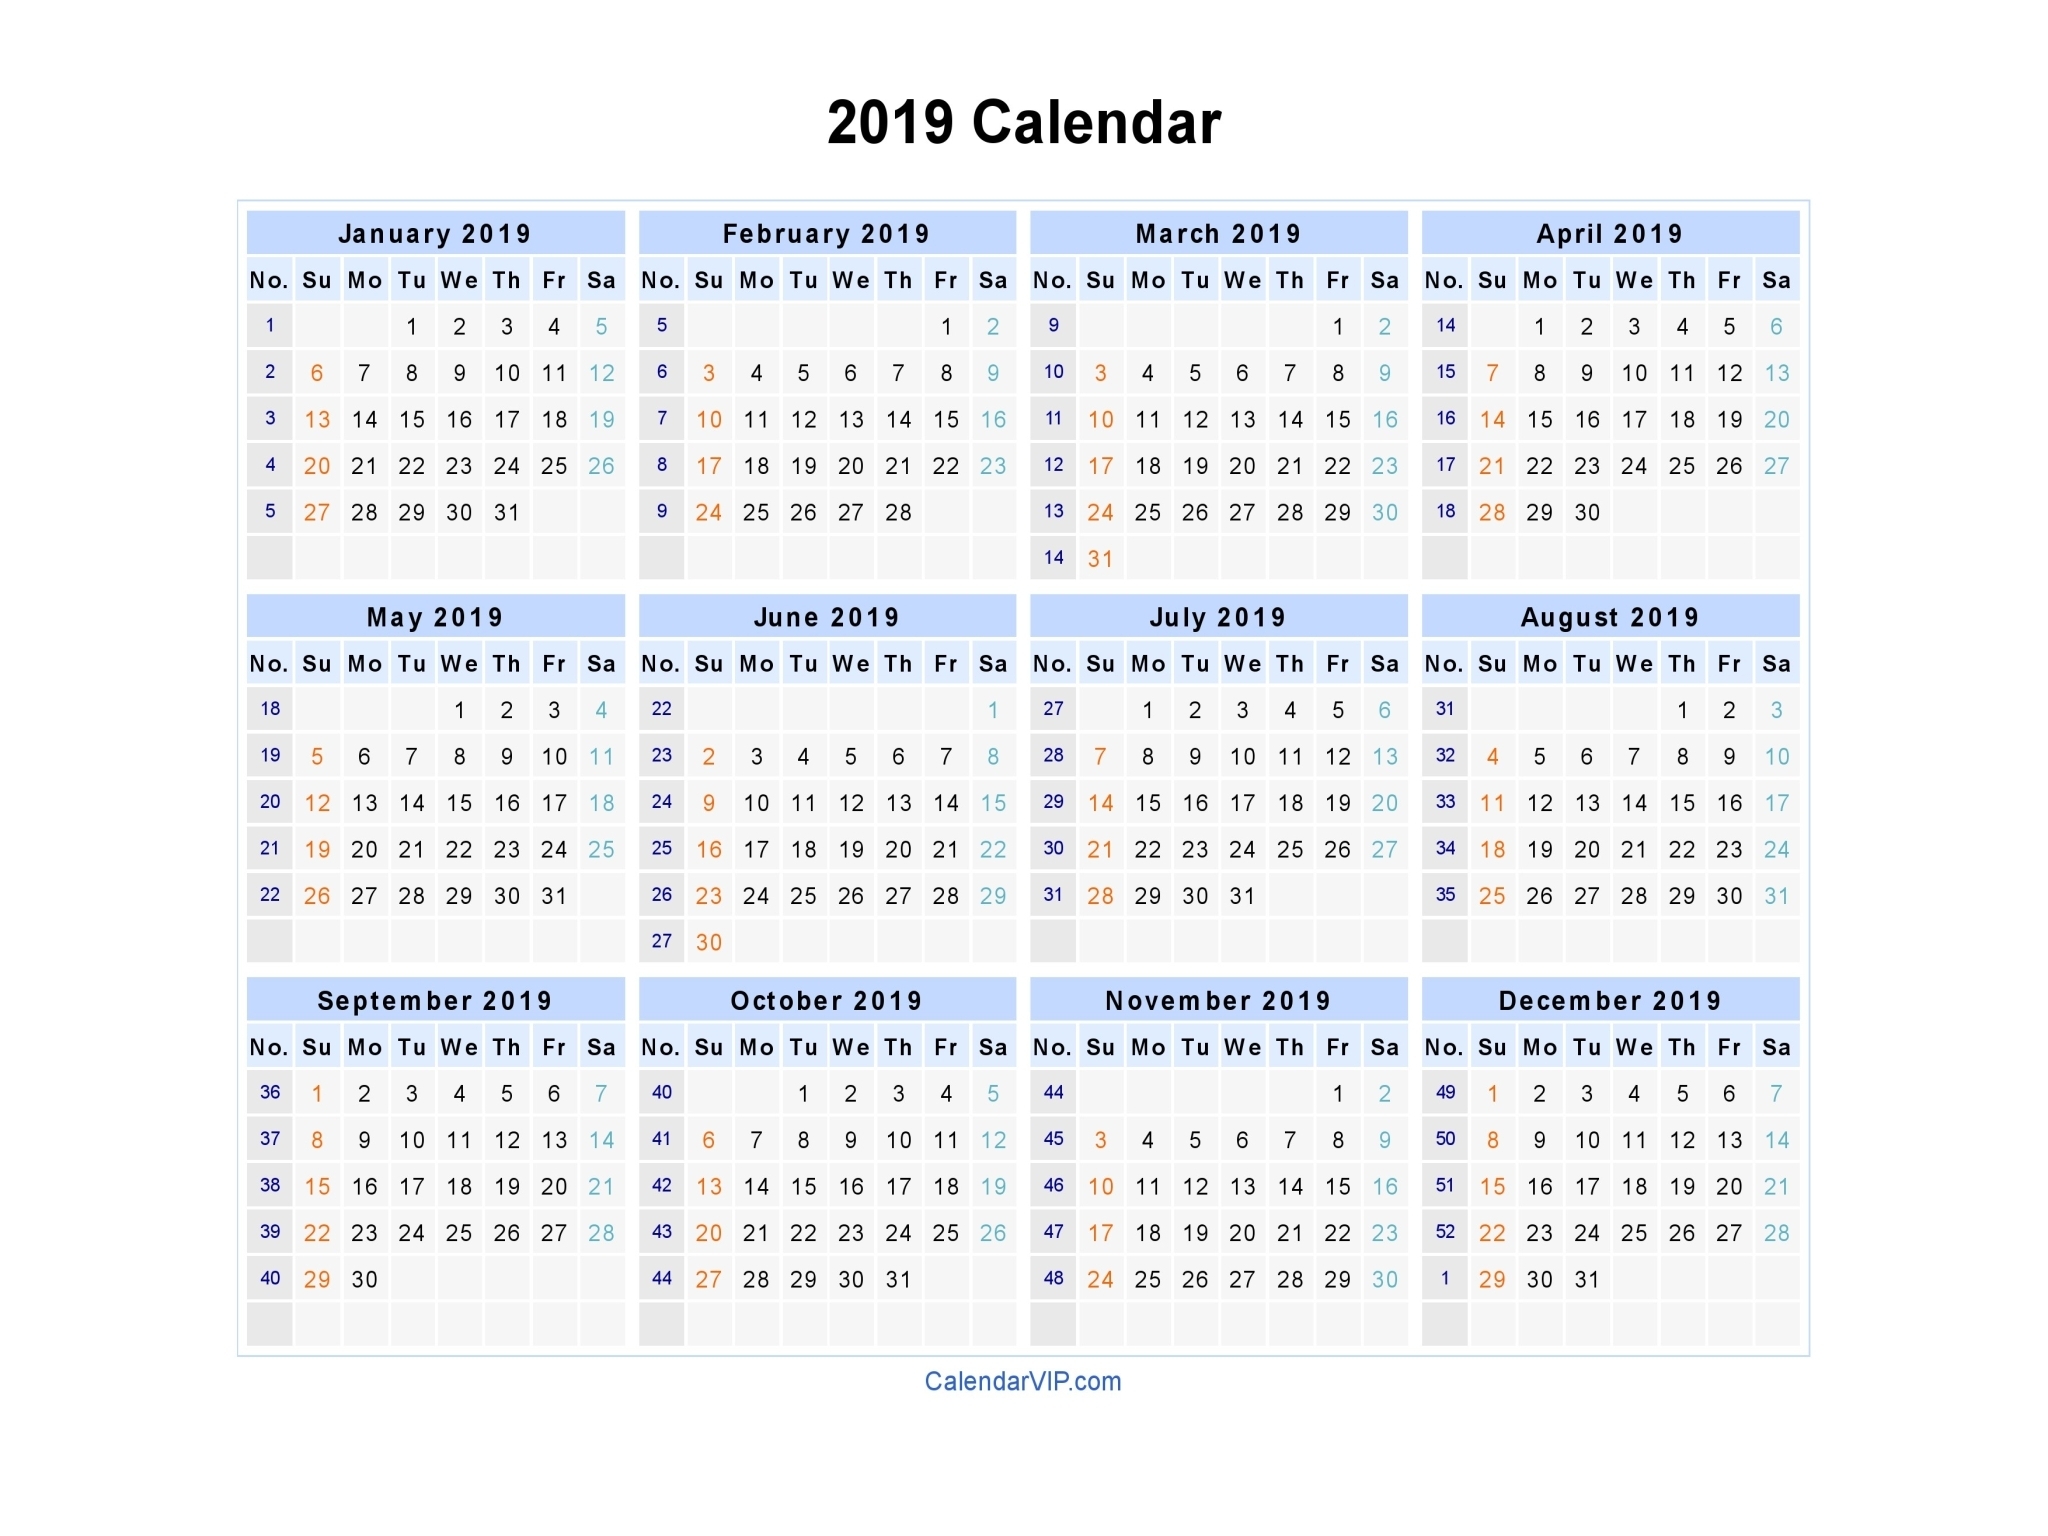 2019 Calendar - Blank Printable Calendar Template In Pdf in Yearly Monday To Sunday Calendar 2020 With Week Numbers